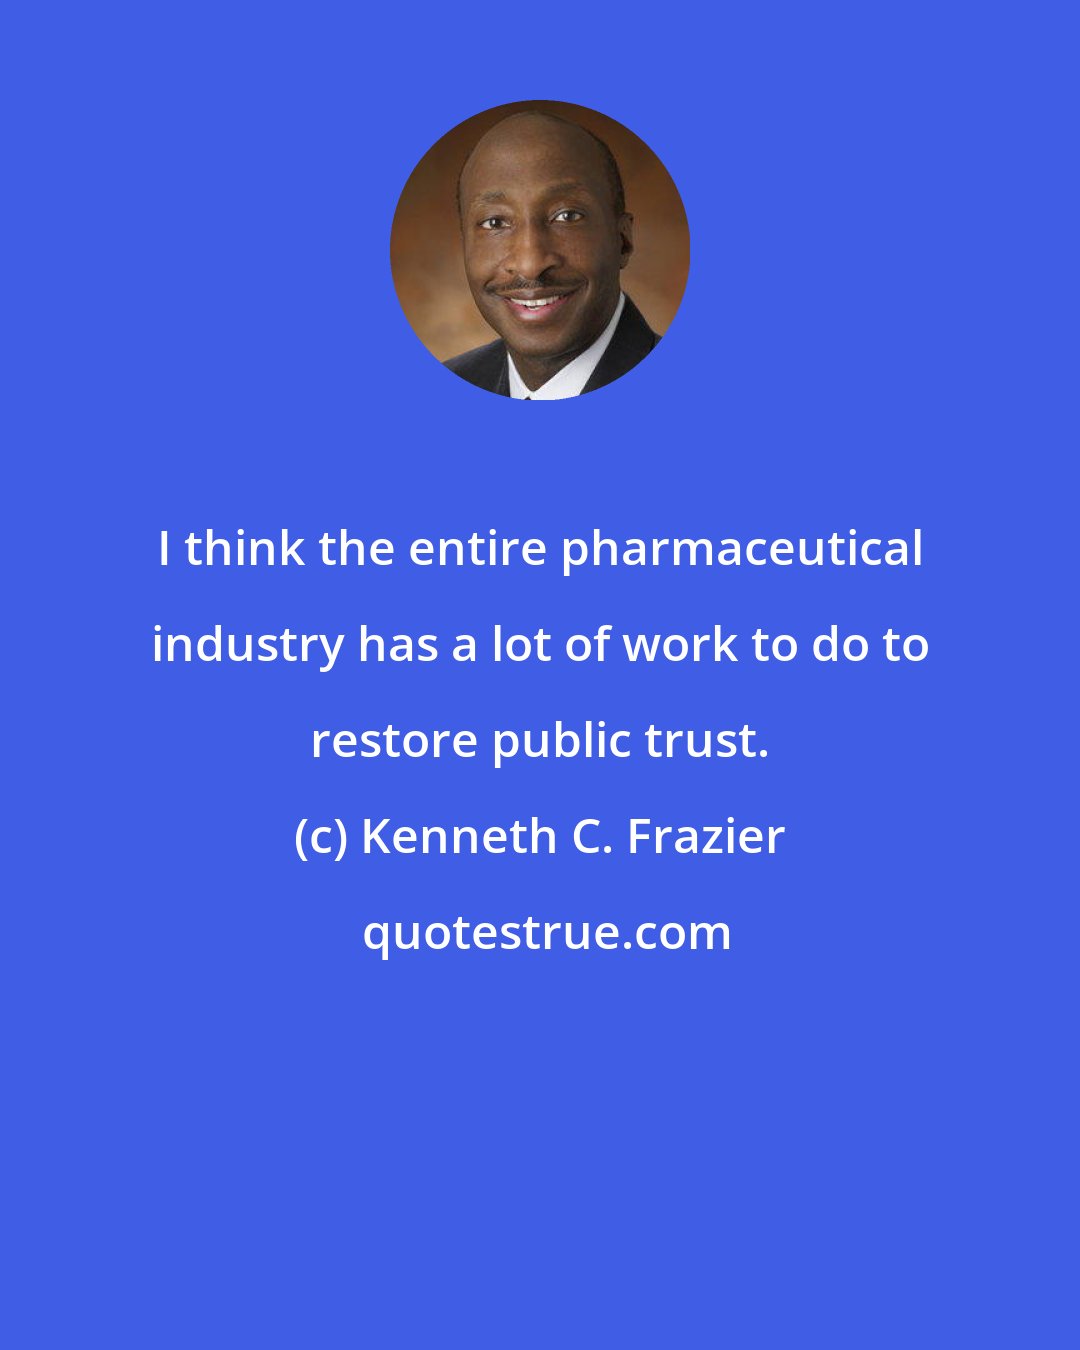 Kenneth C. Frazier: I think the entire pharmaceutical industry has a lot of work to do to restore public trust.